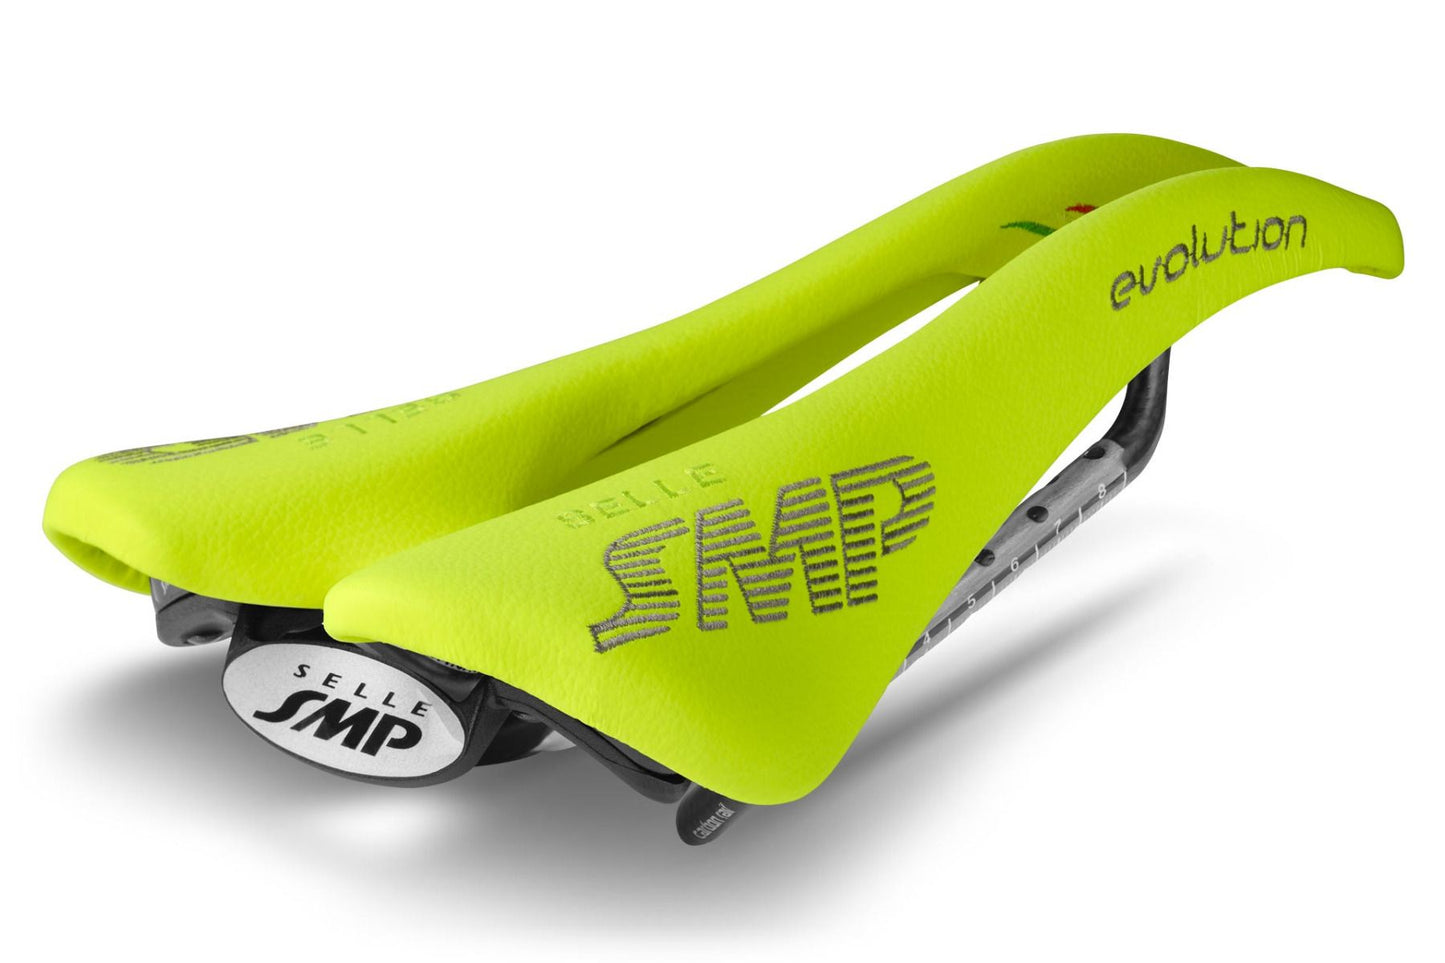 Selle SMP Evolution Saddle with Carbon Rails (Fluro Yellow)